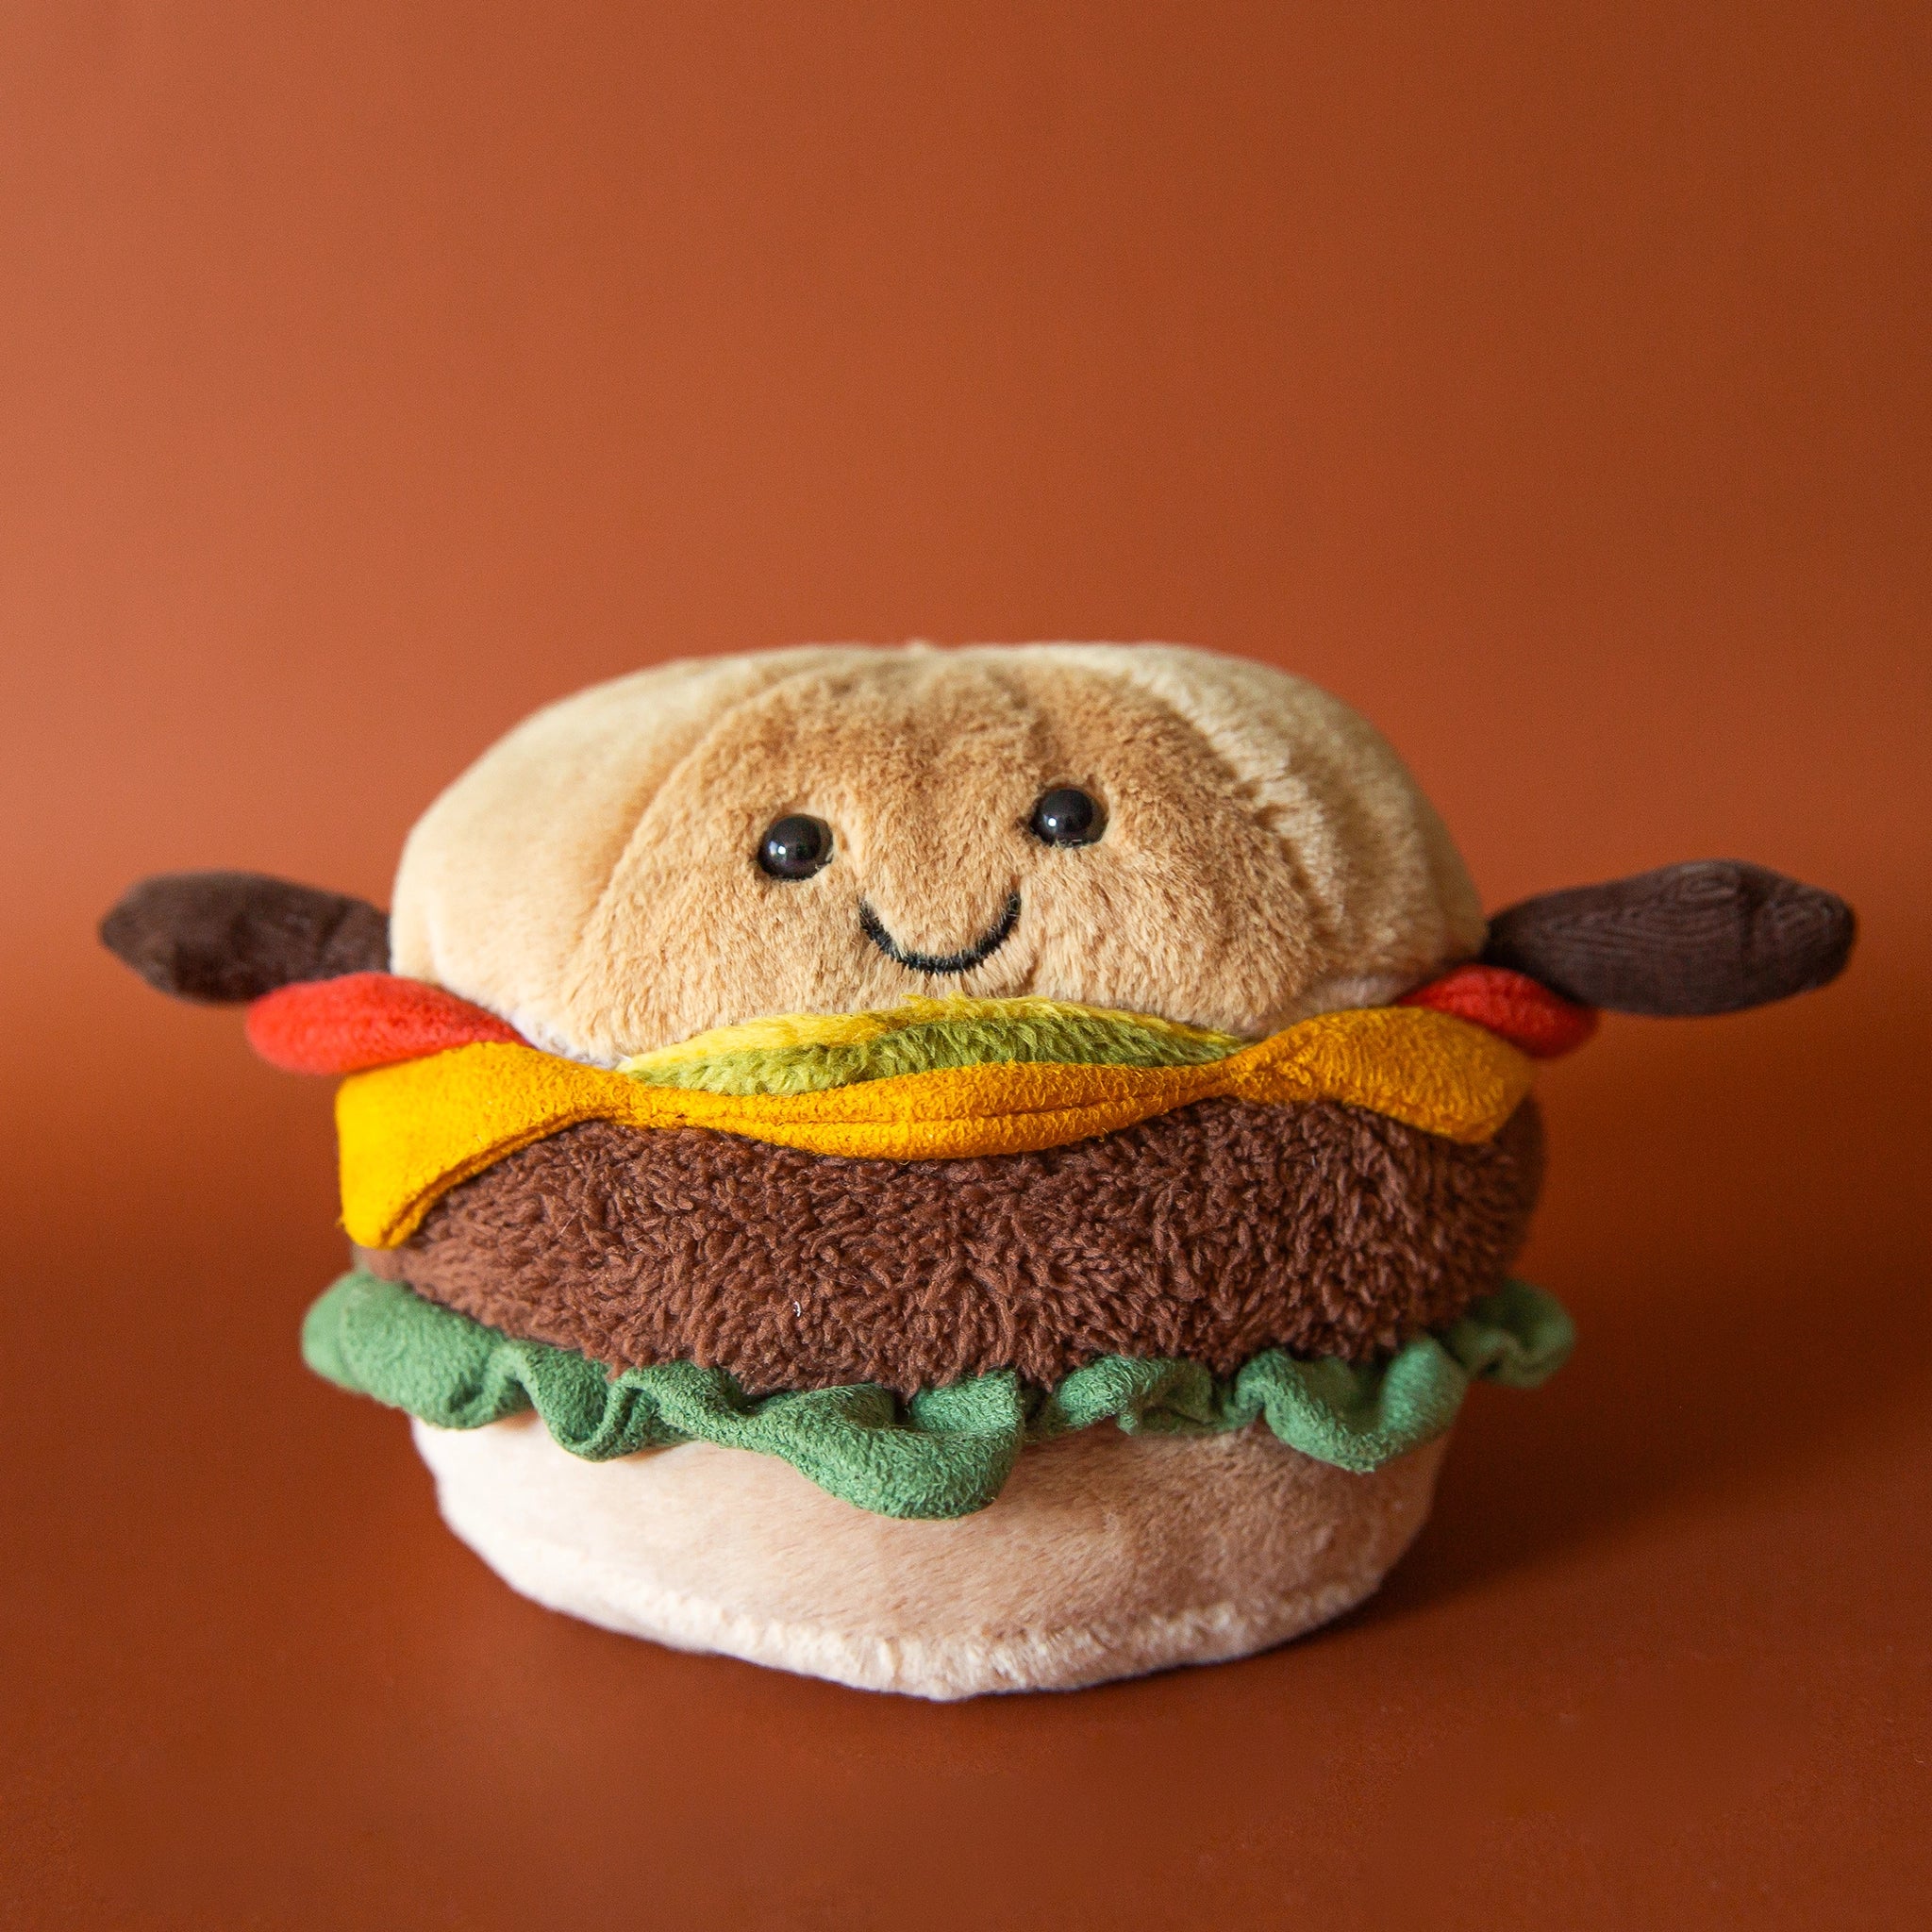 On a brown background is a stuffed burger toy with a smiling face.